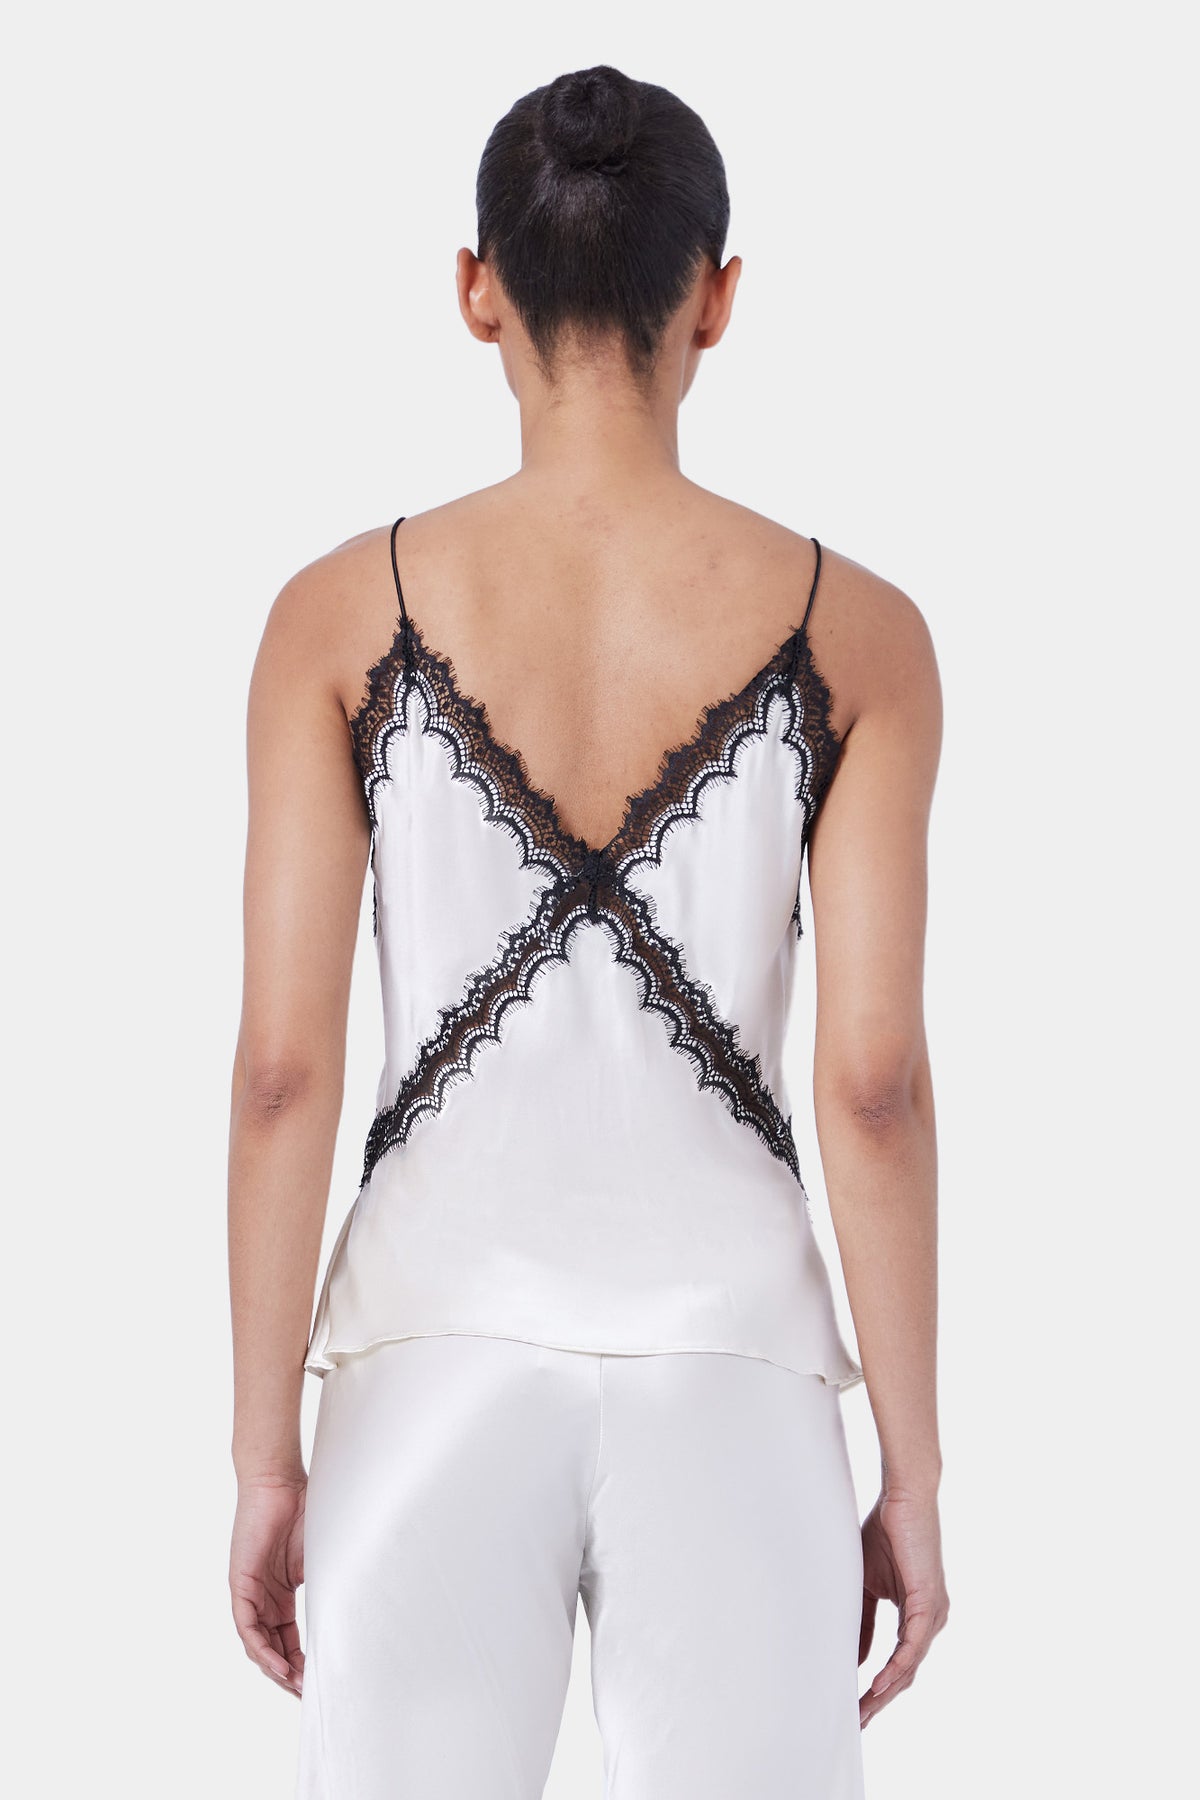 The Sadie Top By GINIA In White-Black